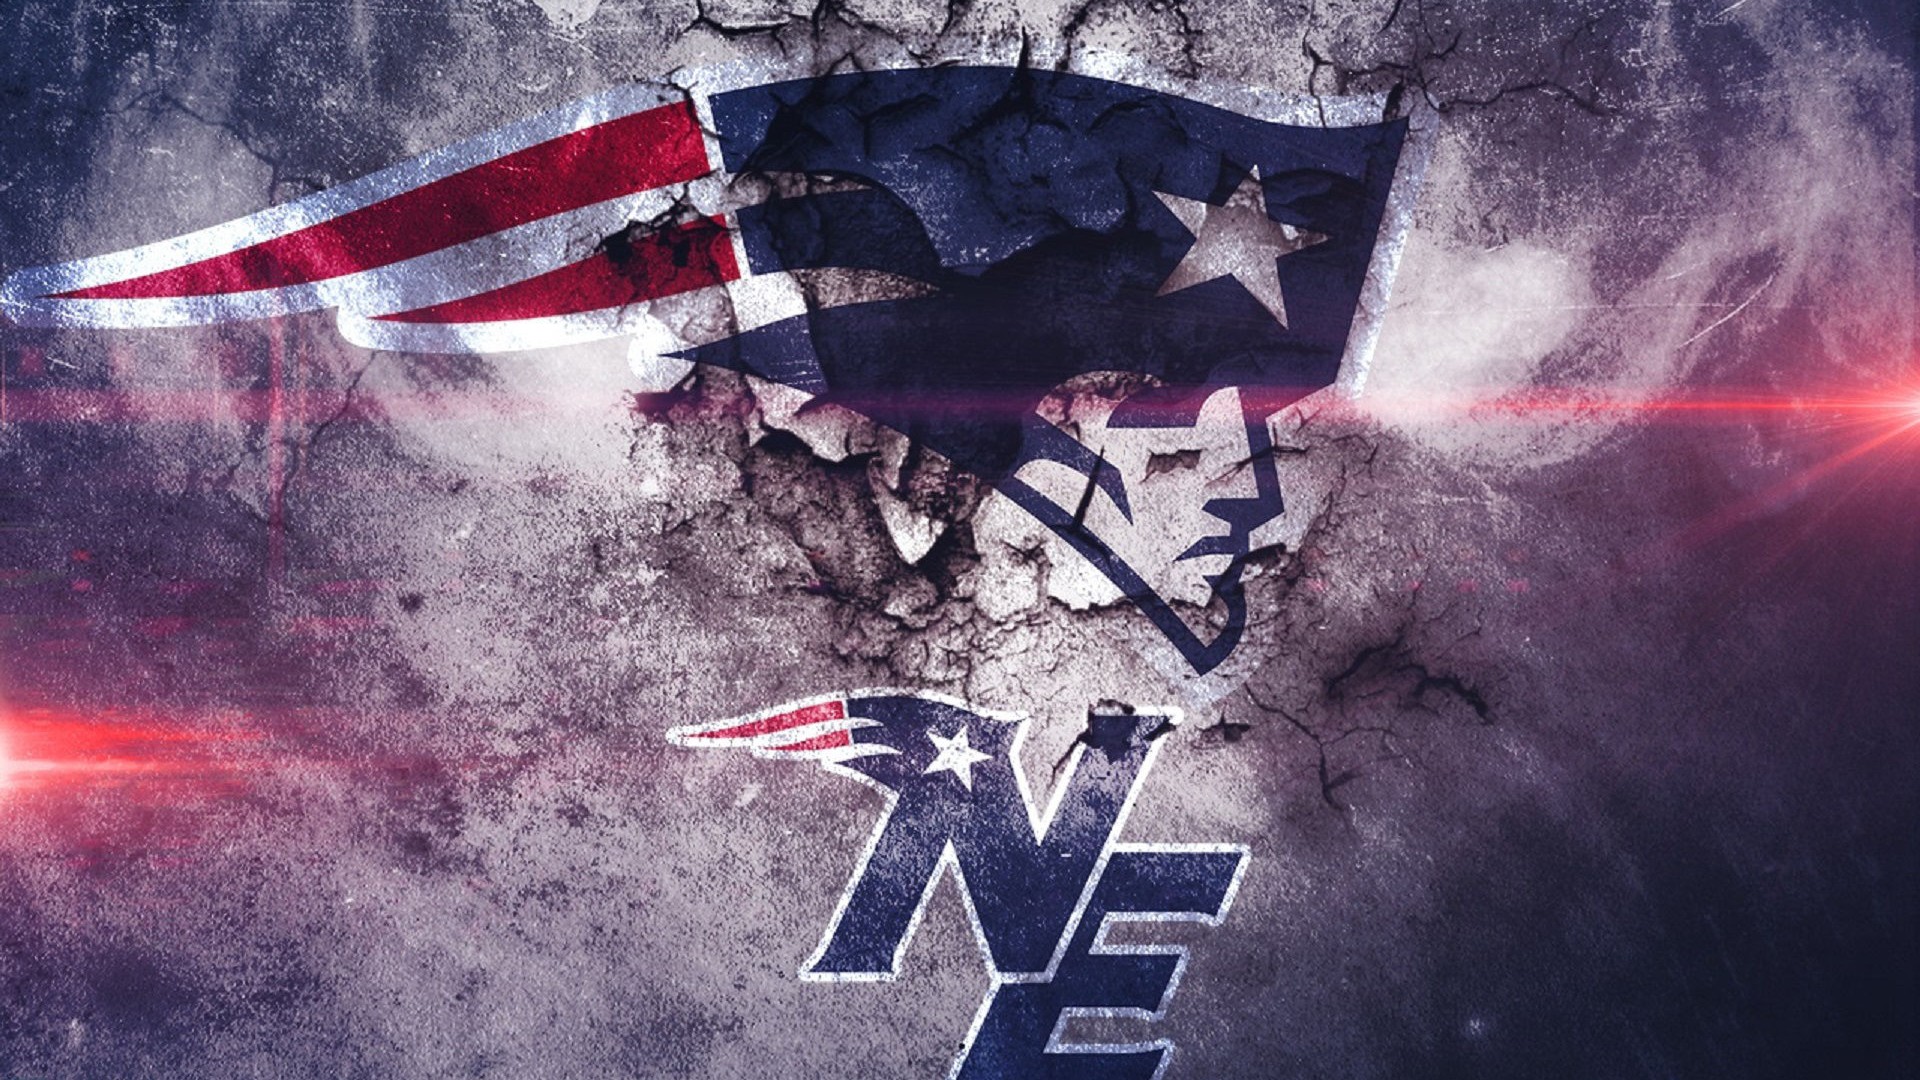 Wallpapers HD New England Patriots with resolution 1920x1080 pixel. You can make this wallpaper for your Mac or Windows Desktop Background, iPhone, Android or Tablet and another Smartphone device